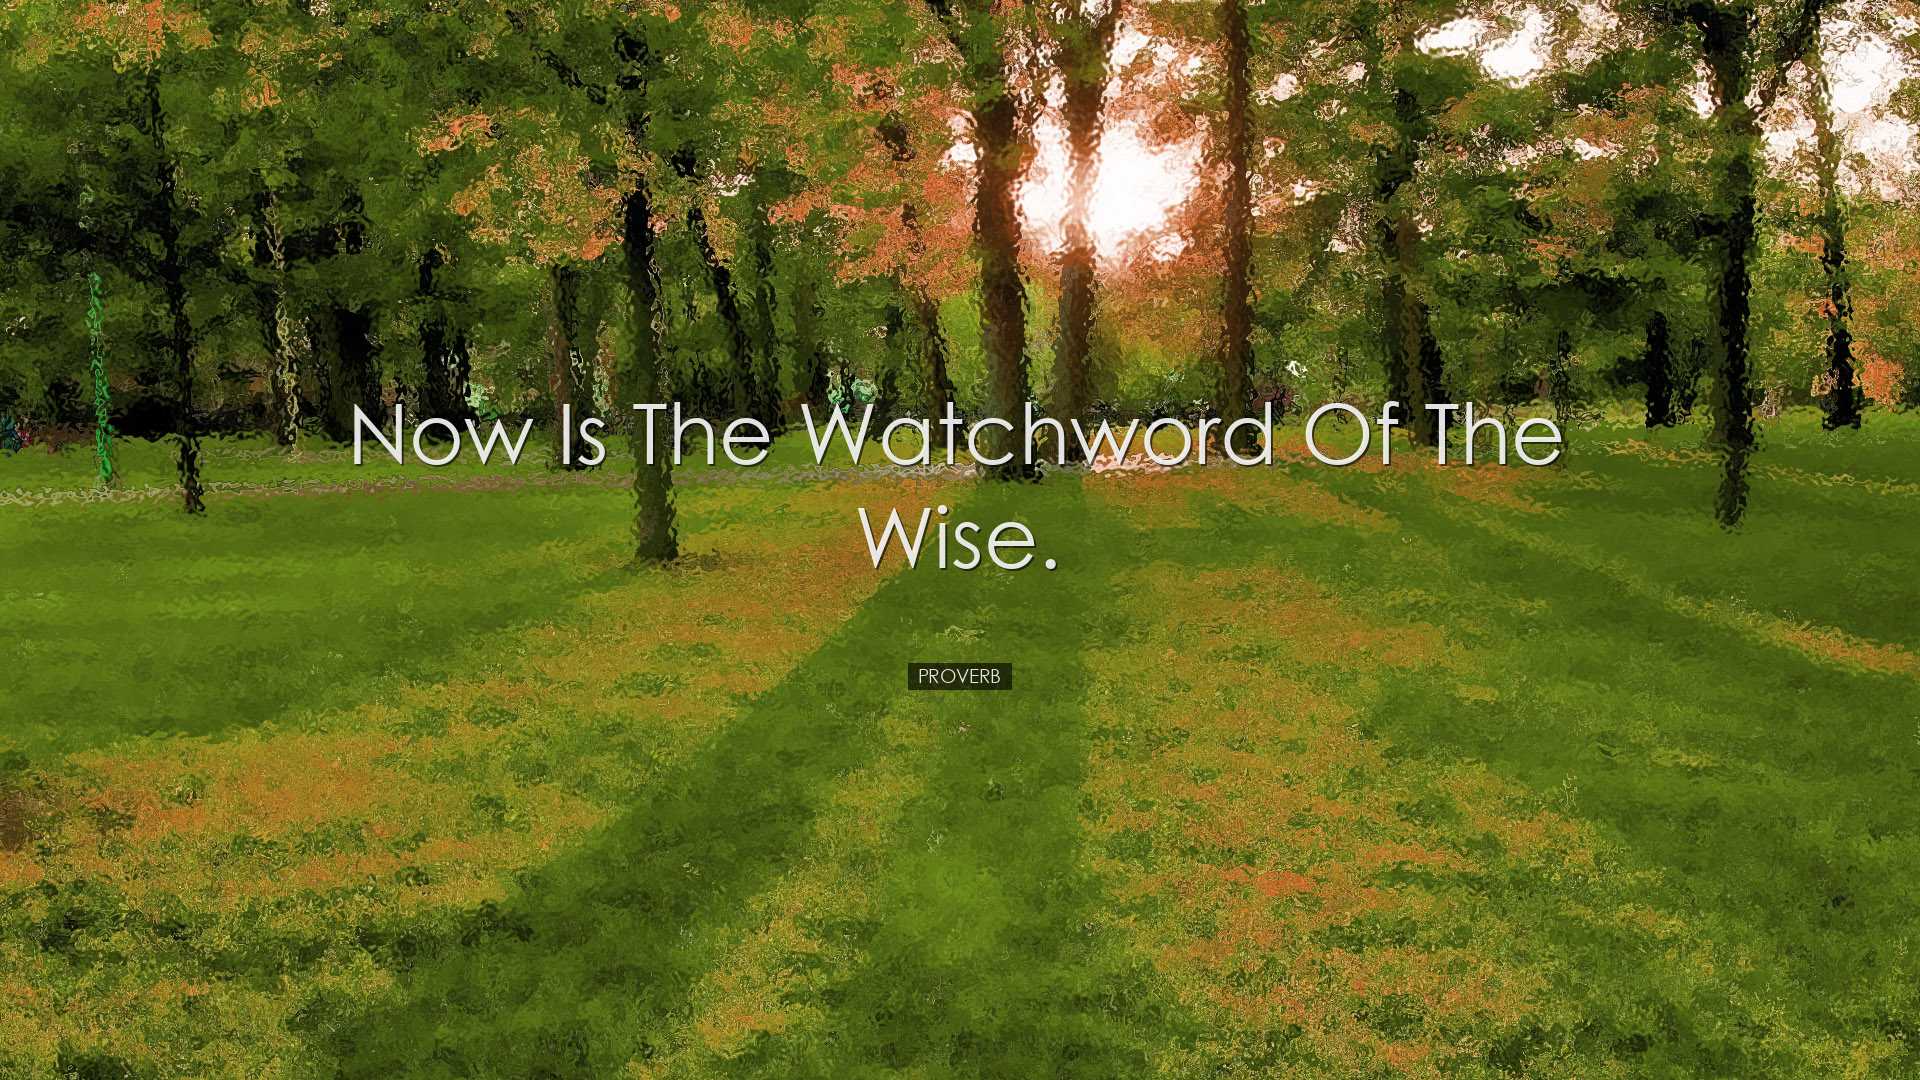 Now is the watchword of the wise. - Proverb